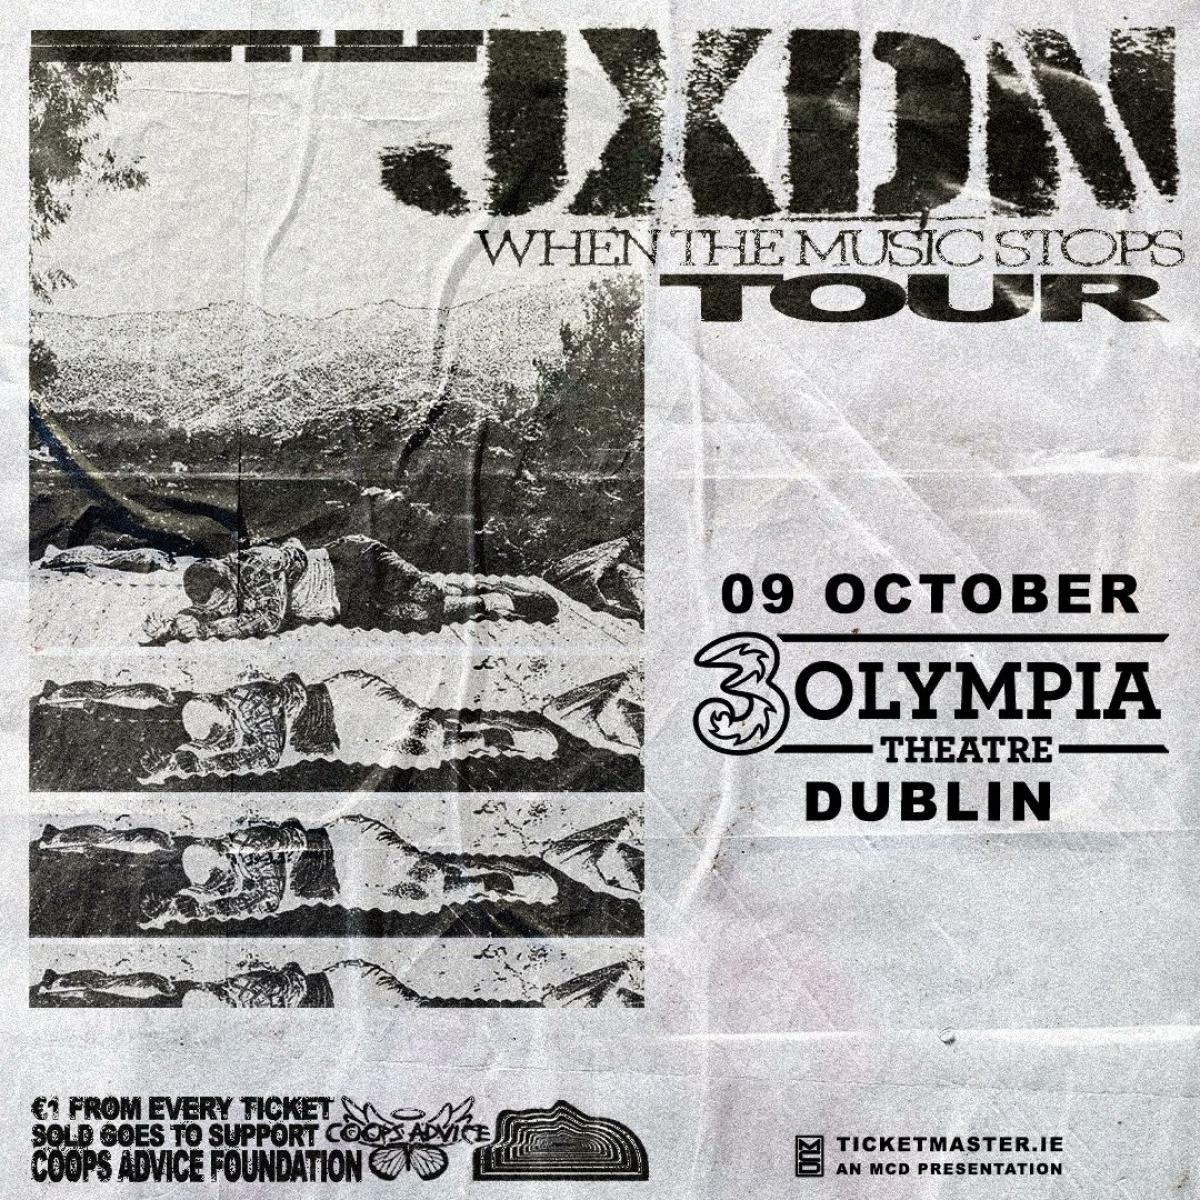 Billets Jxdn - When The Music Stops Tour (3Olympia Theatre - Dublin)